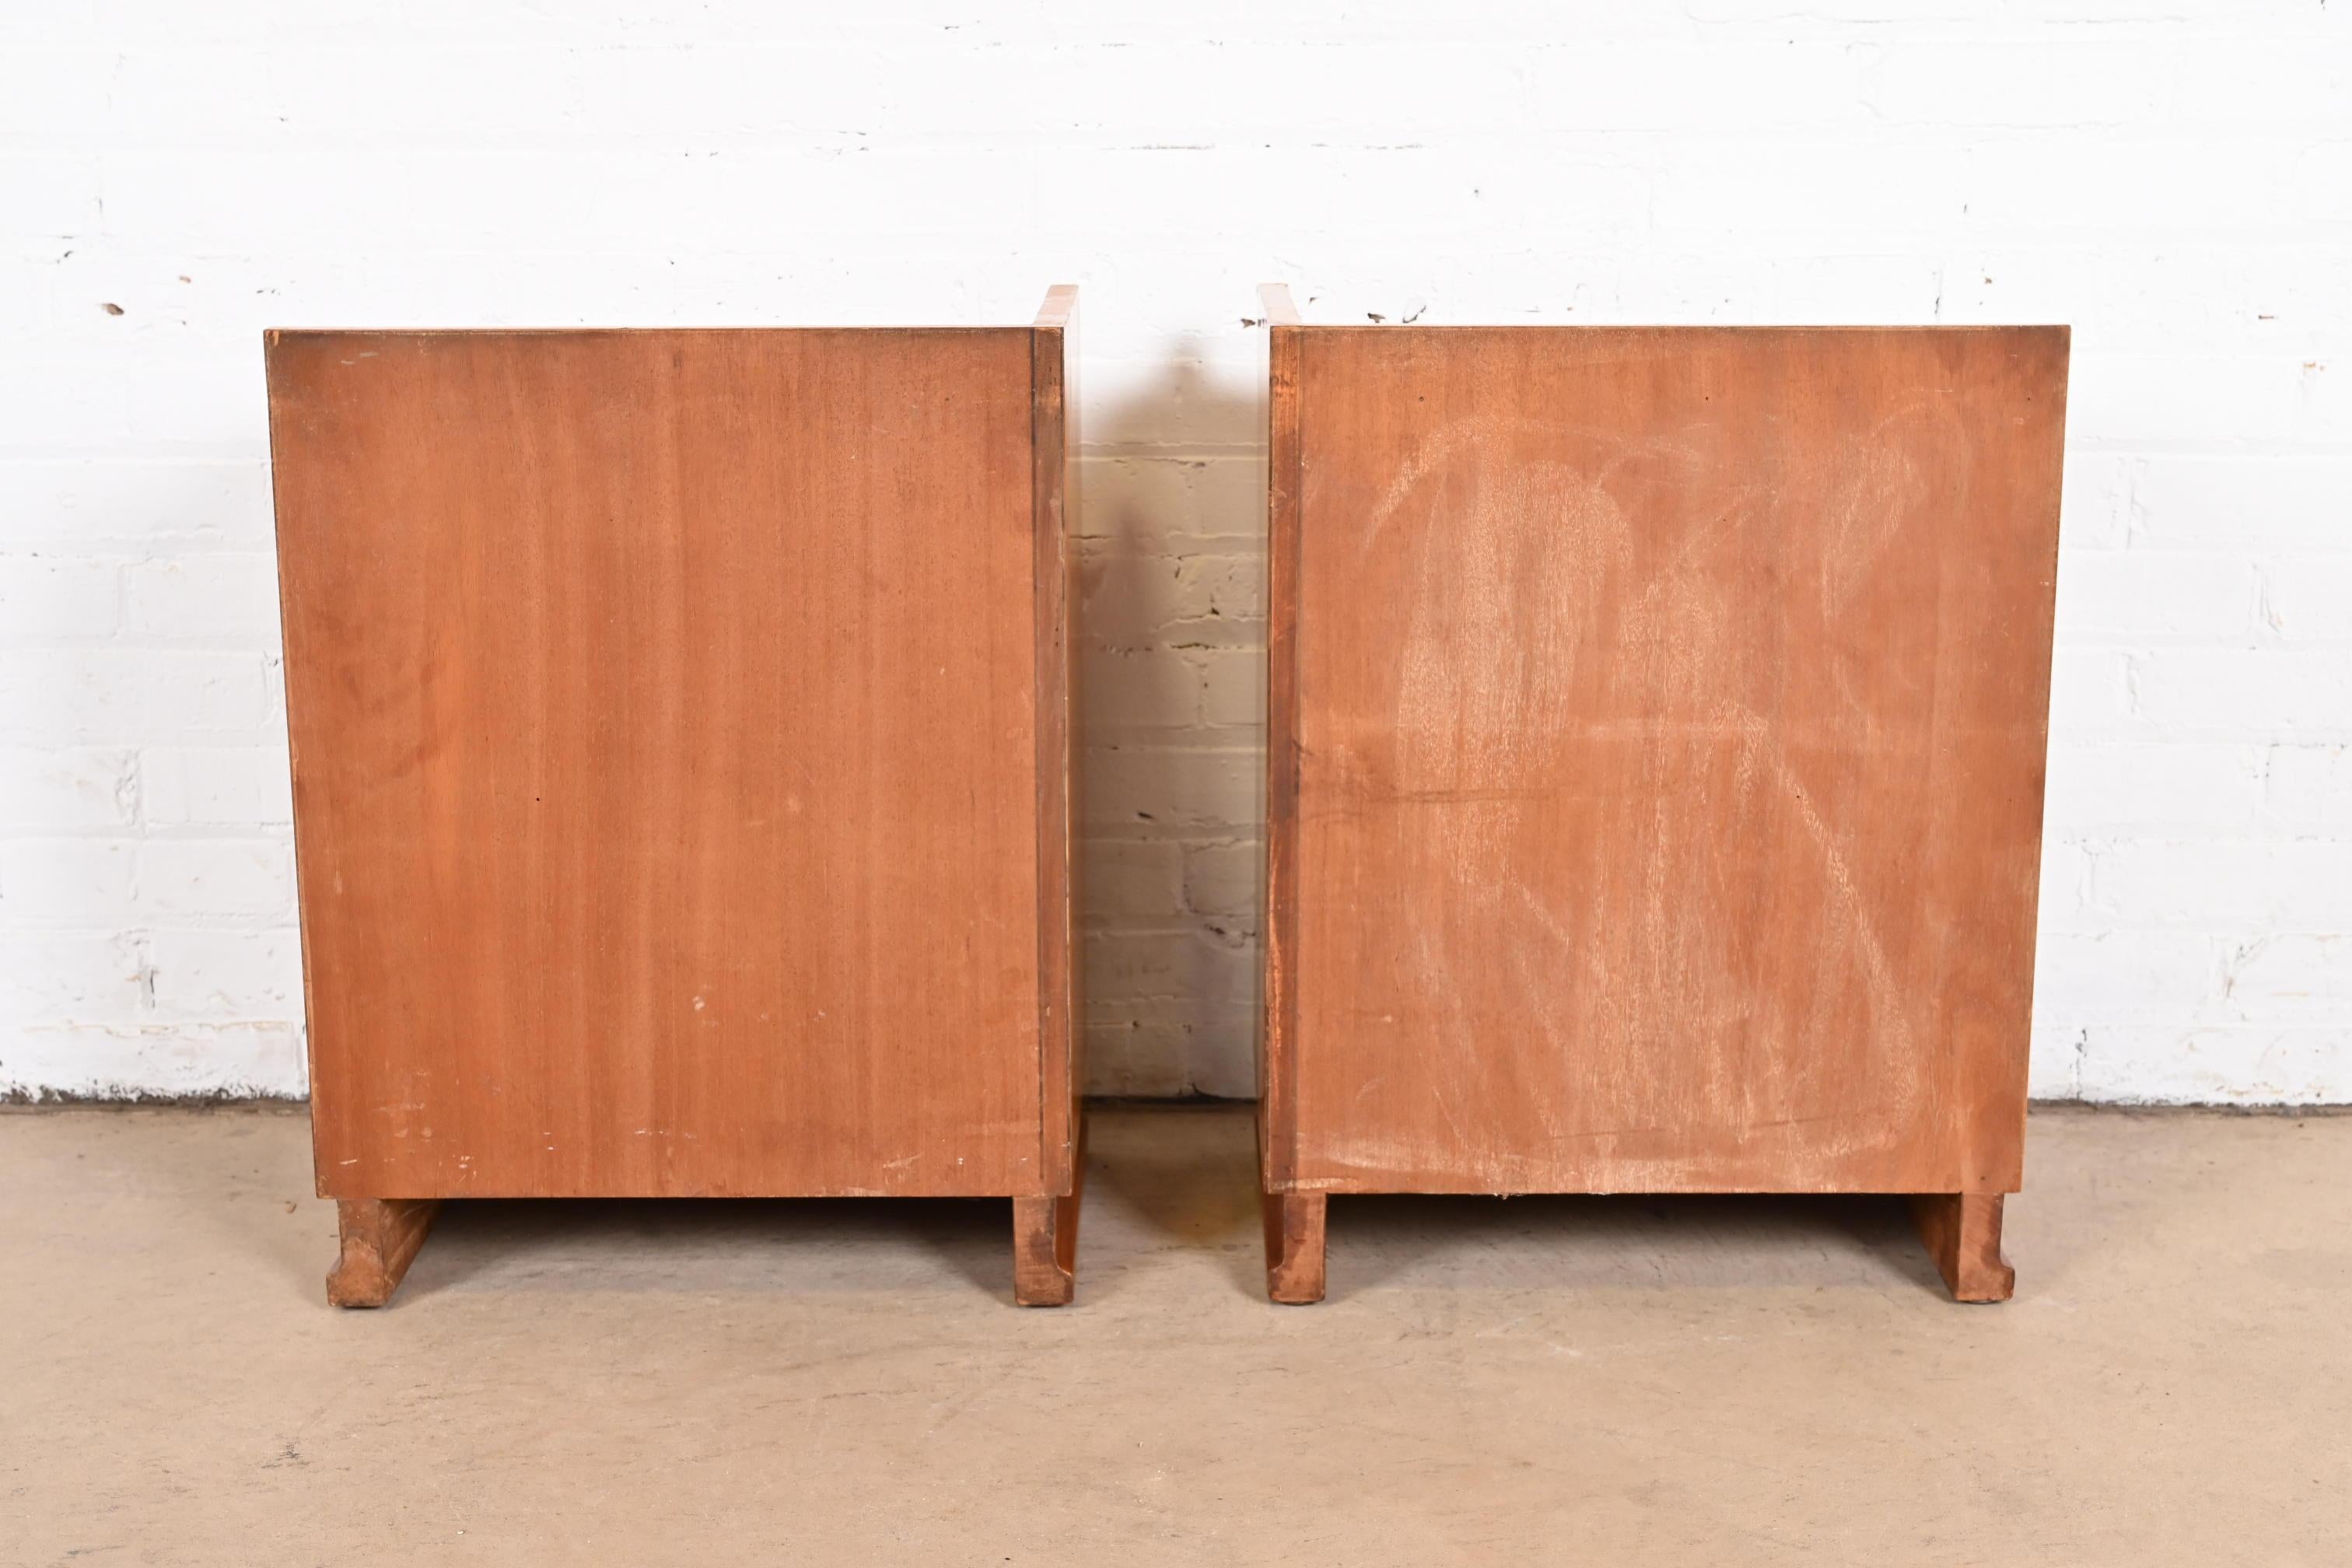 French Art Deco Burl Wood Nightstands in the Manner of Maison Dominique, 1930s For Sale 5